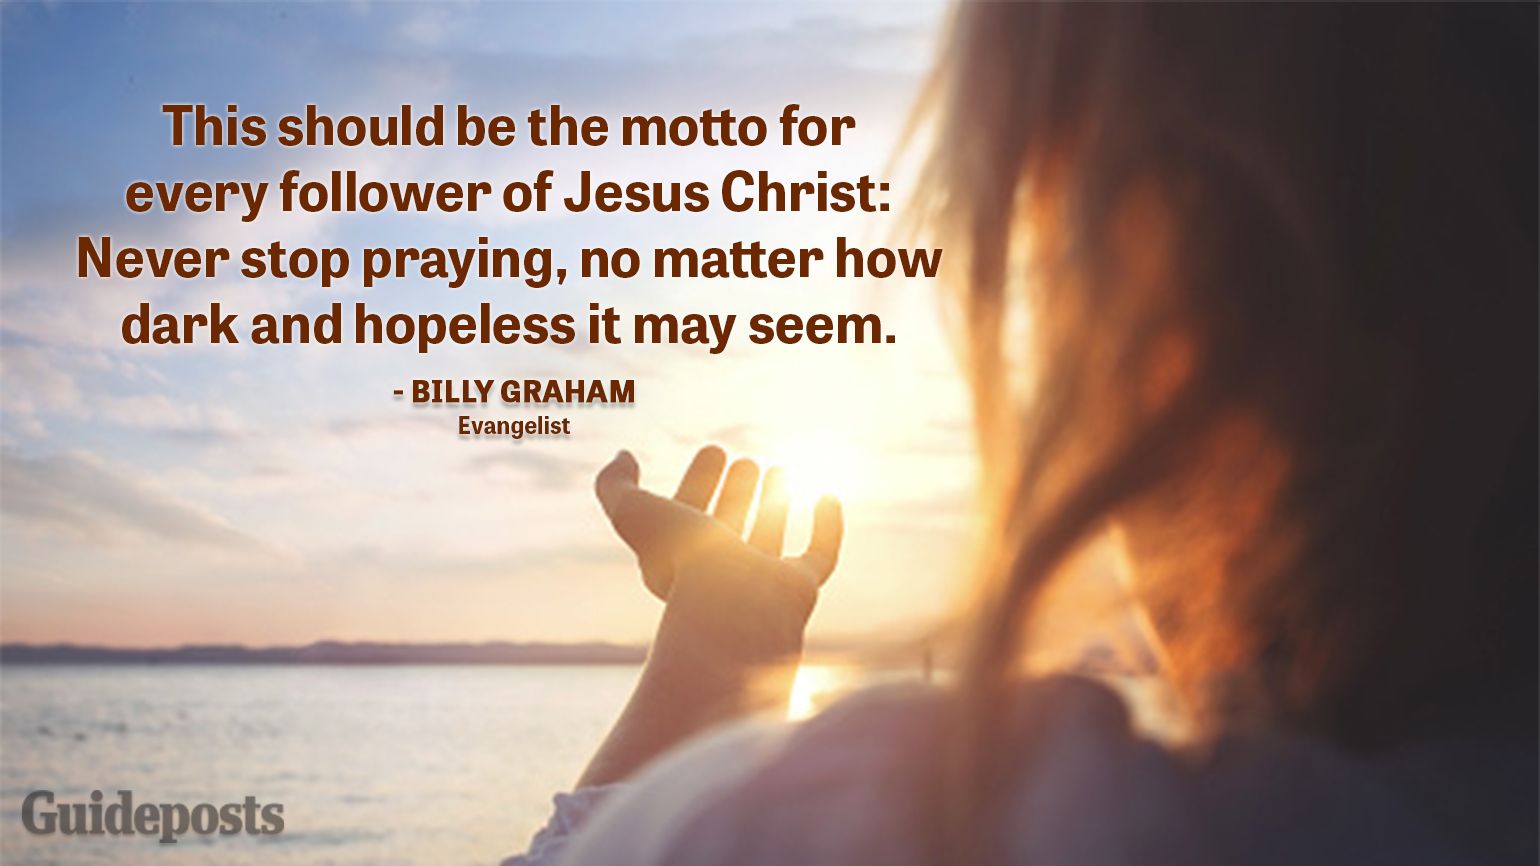 Uplifting Quotes to Cope with Grief "This should be the motto for every follower of Jesus Christ: Never stop praying, no matter how dark and hopeless it may seem." — Billy Graham, Evangelist better living life advice